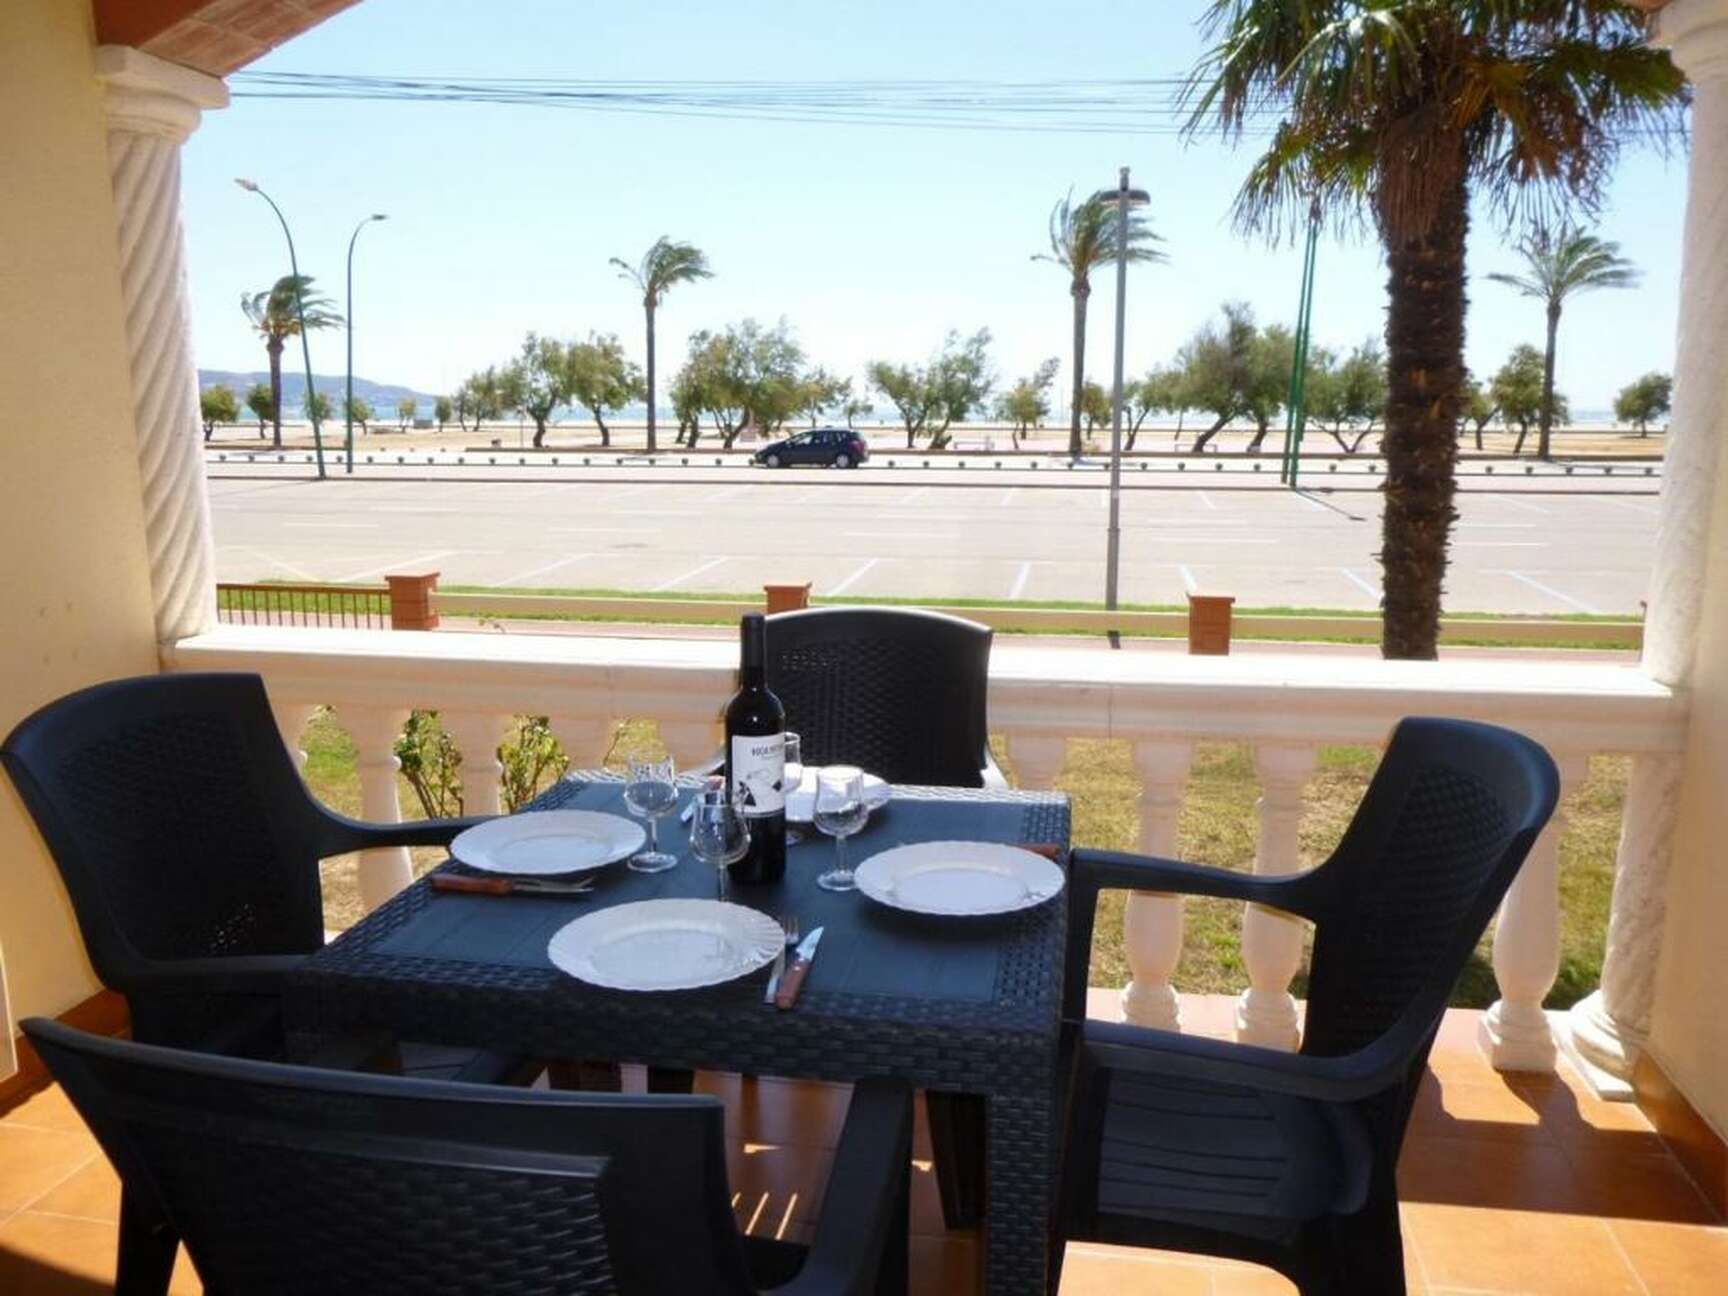 Building of 8 flats on the seafront for sale Empuriabrava